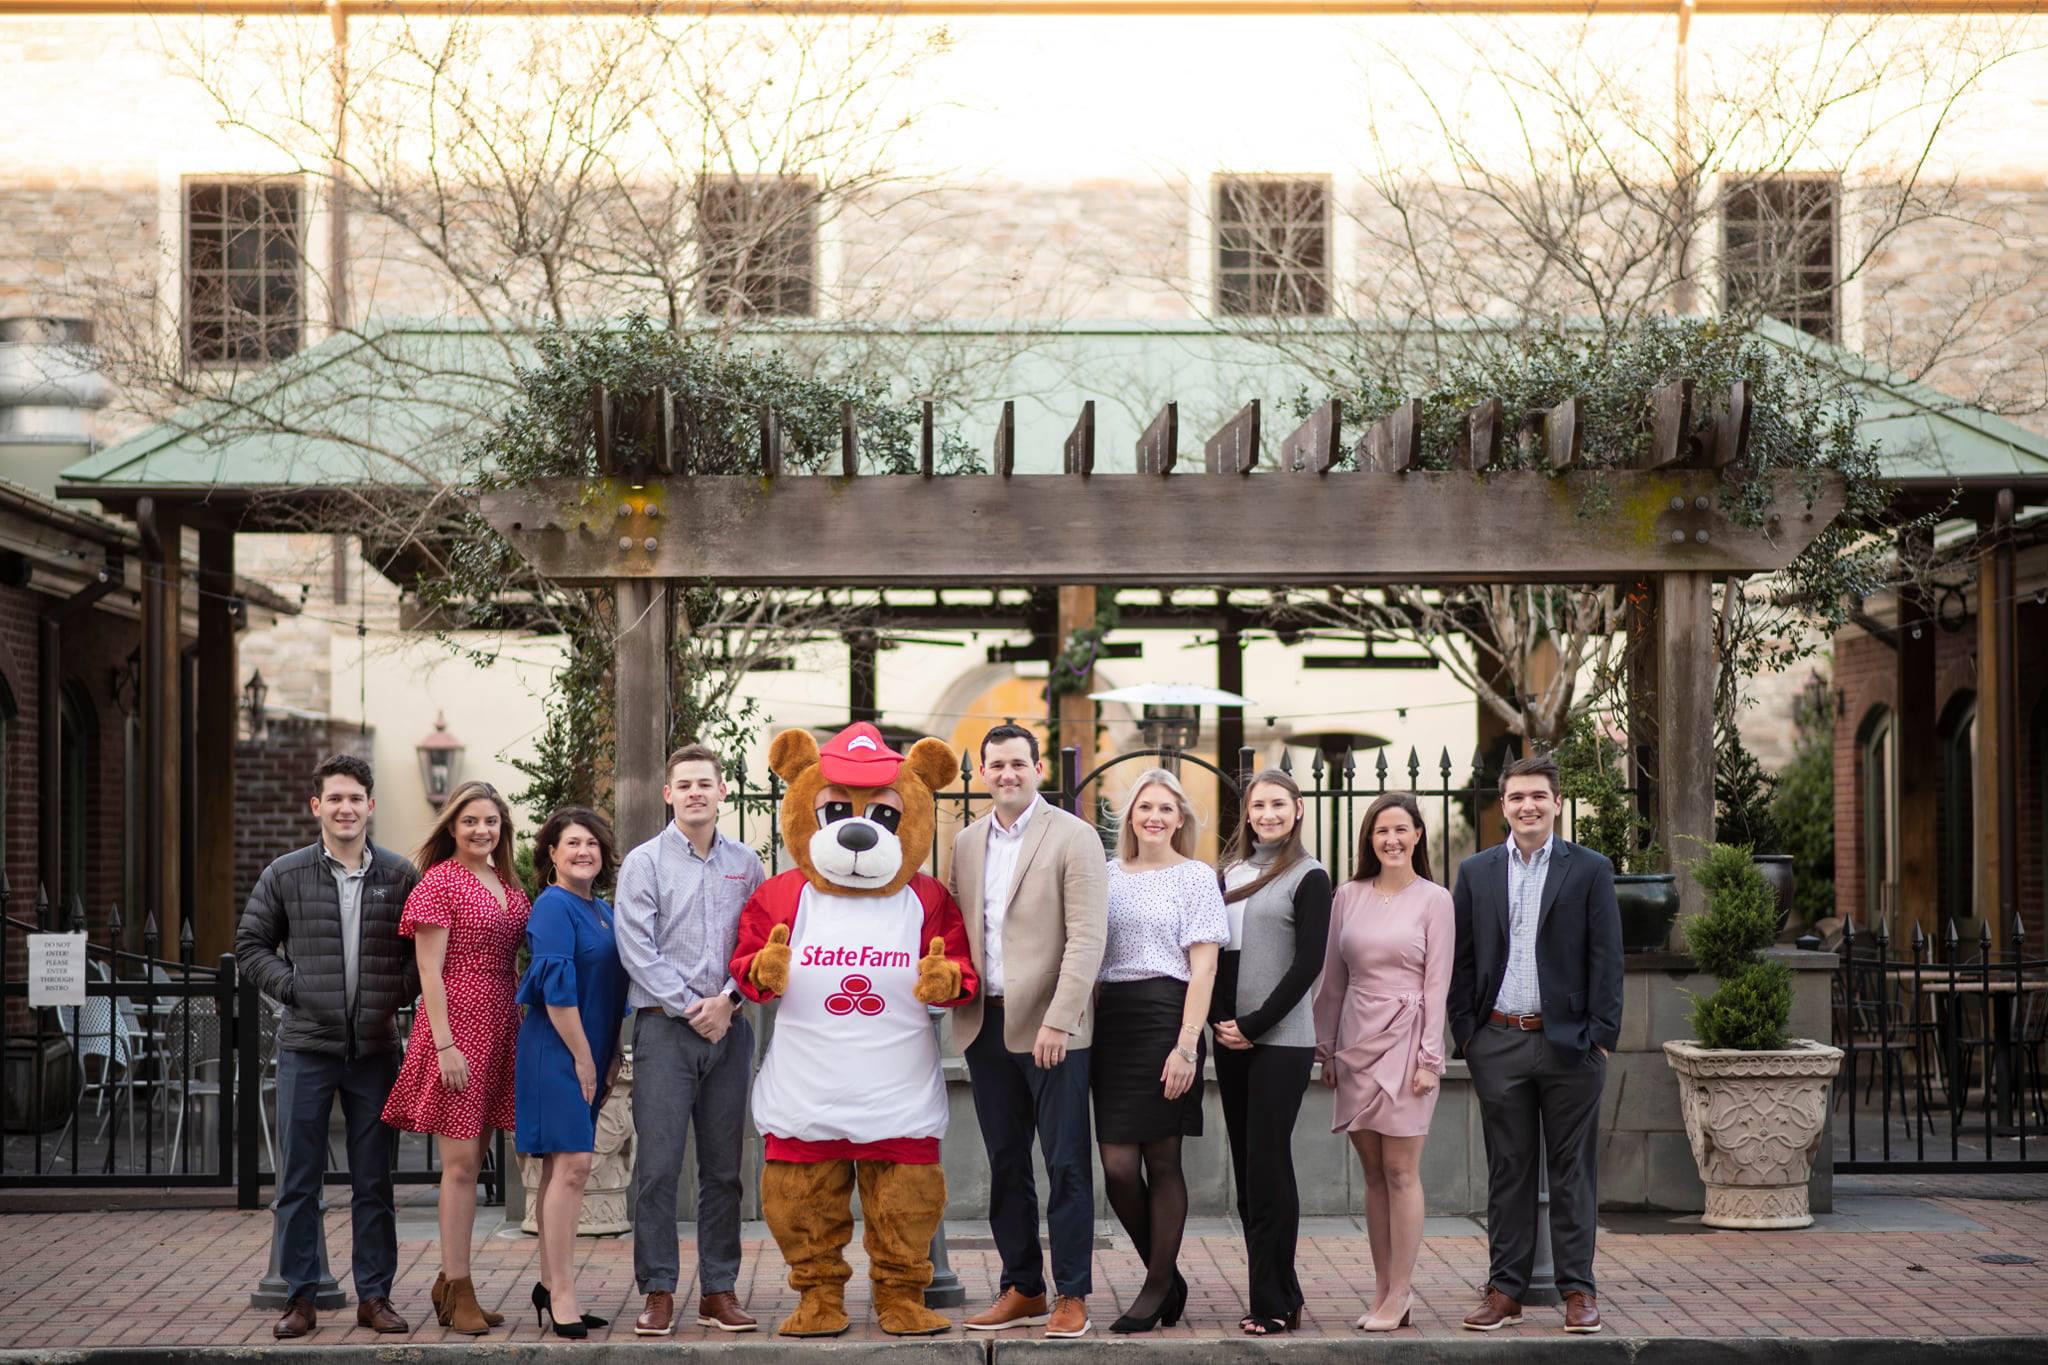 Today is Employee Appreciation Day, so I want to give a shout out to the best crew in town! Ross Garbarino - State Farm Insurance Agent Baton Rouge (225)751-4840